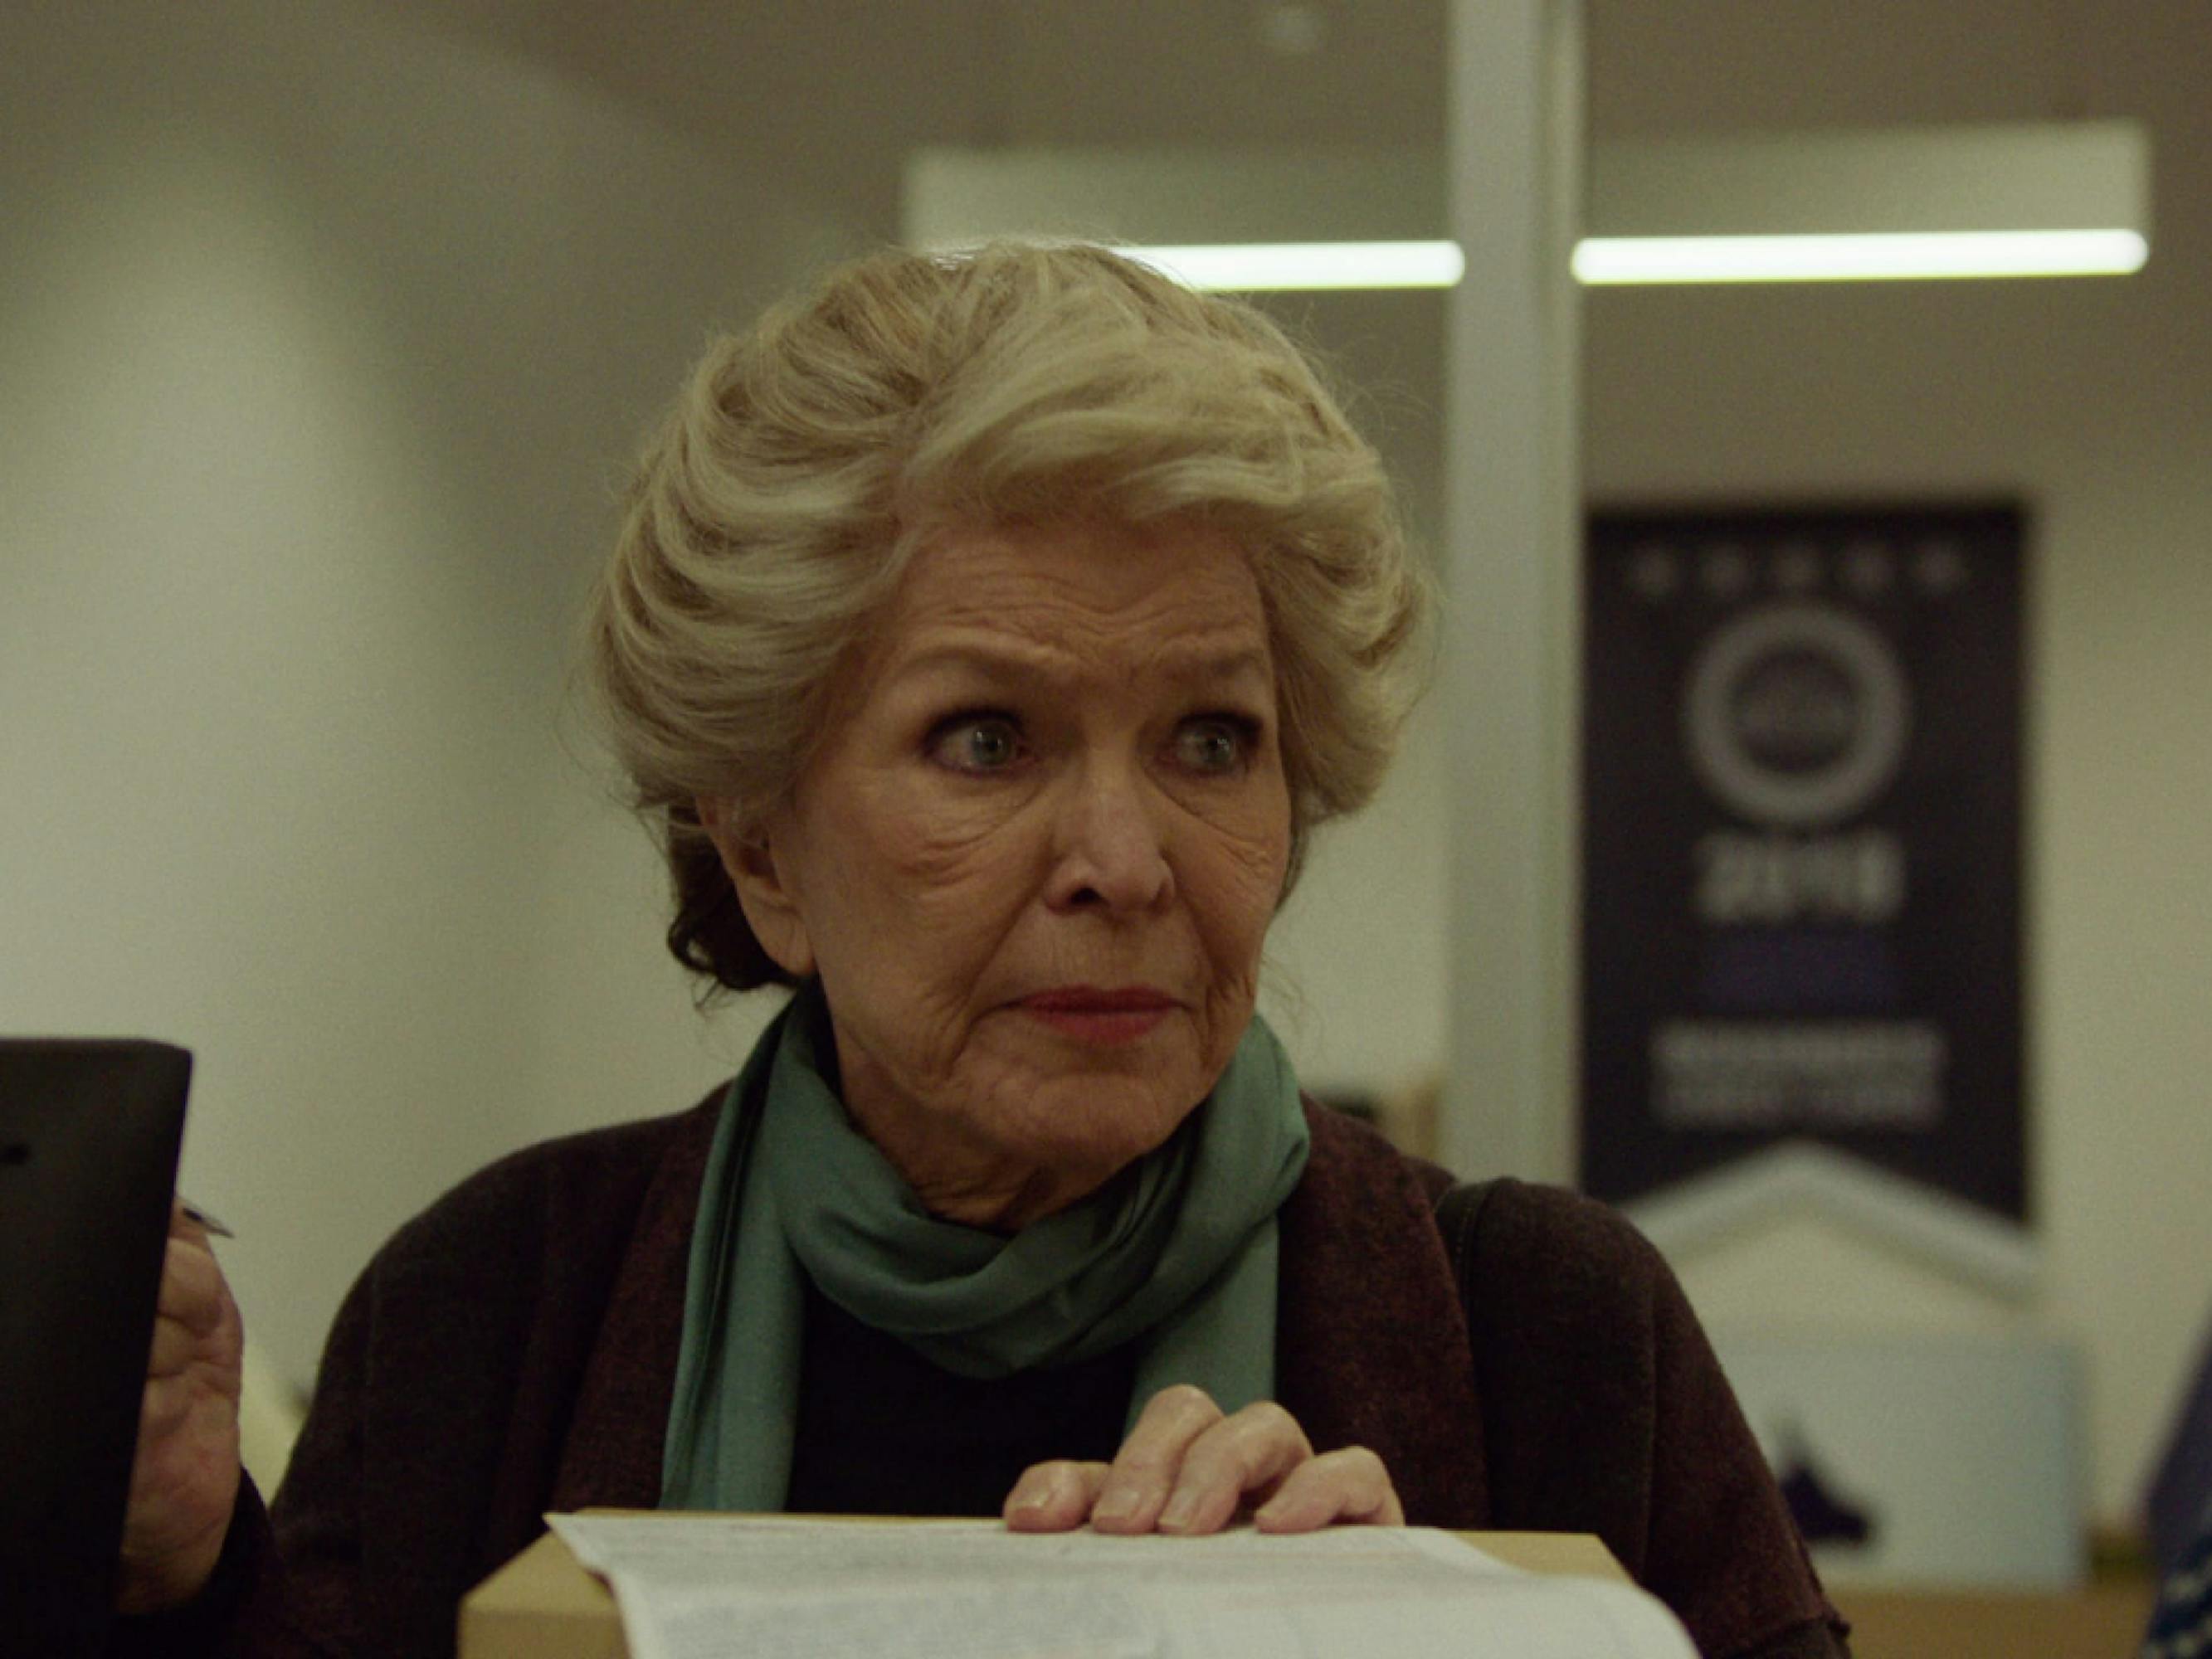 Ellen Burstyn as Elizabeth Weiss in a still from Pieces of a Woman. Her large blue eyes match the thin scarf tied around her neck, and her white hair is styled in an elegant up-do.  